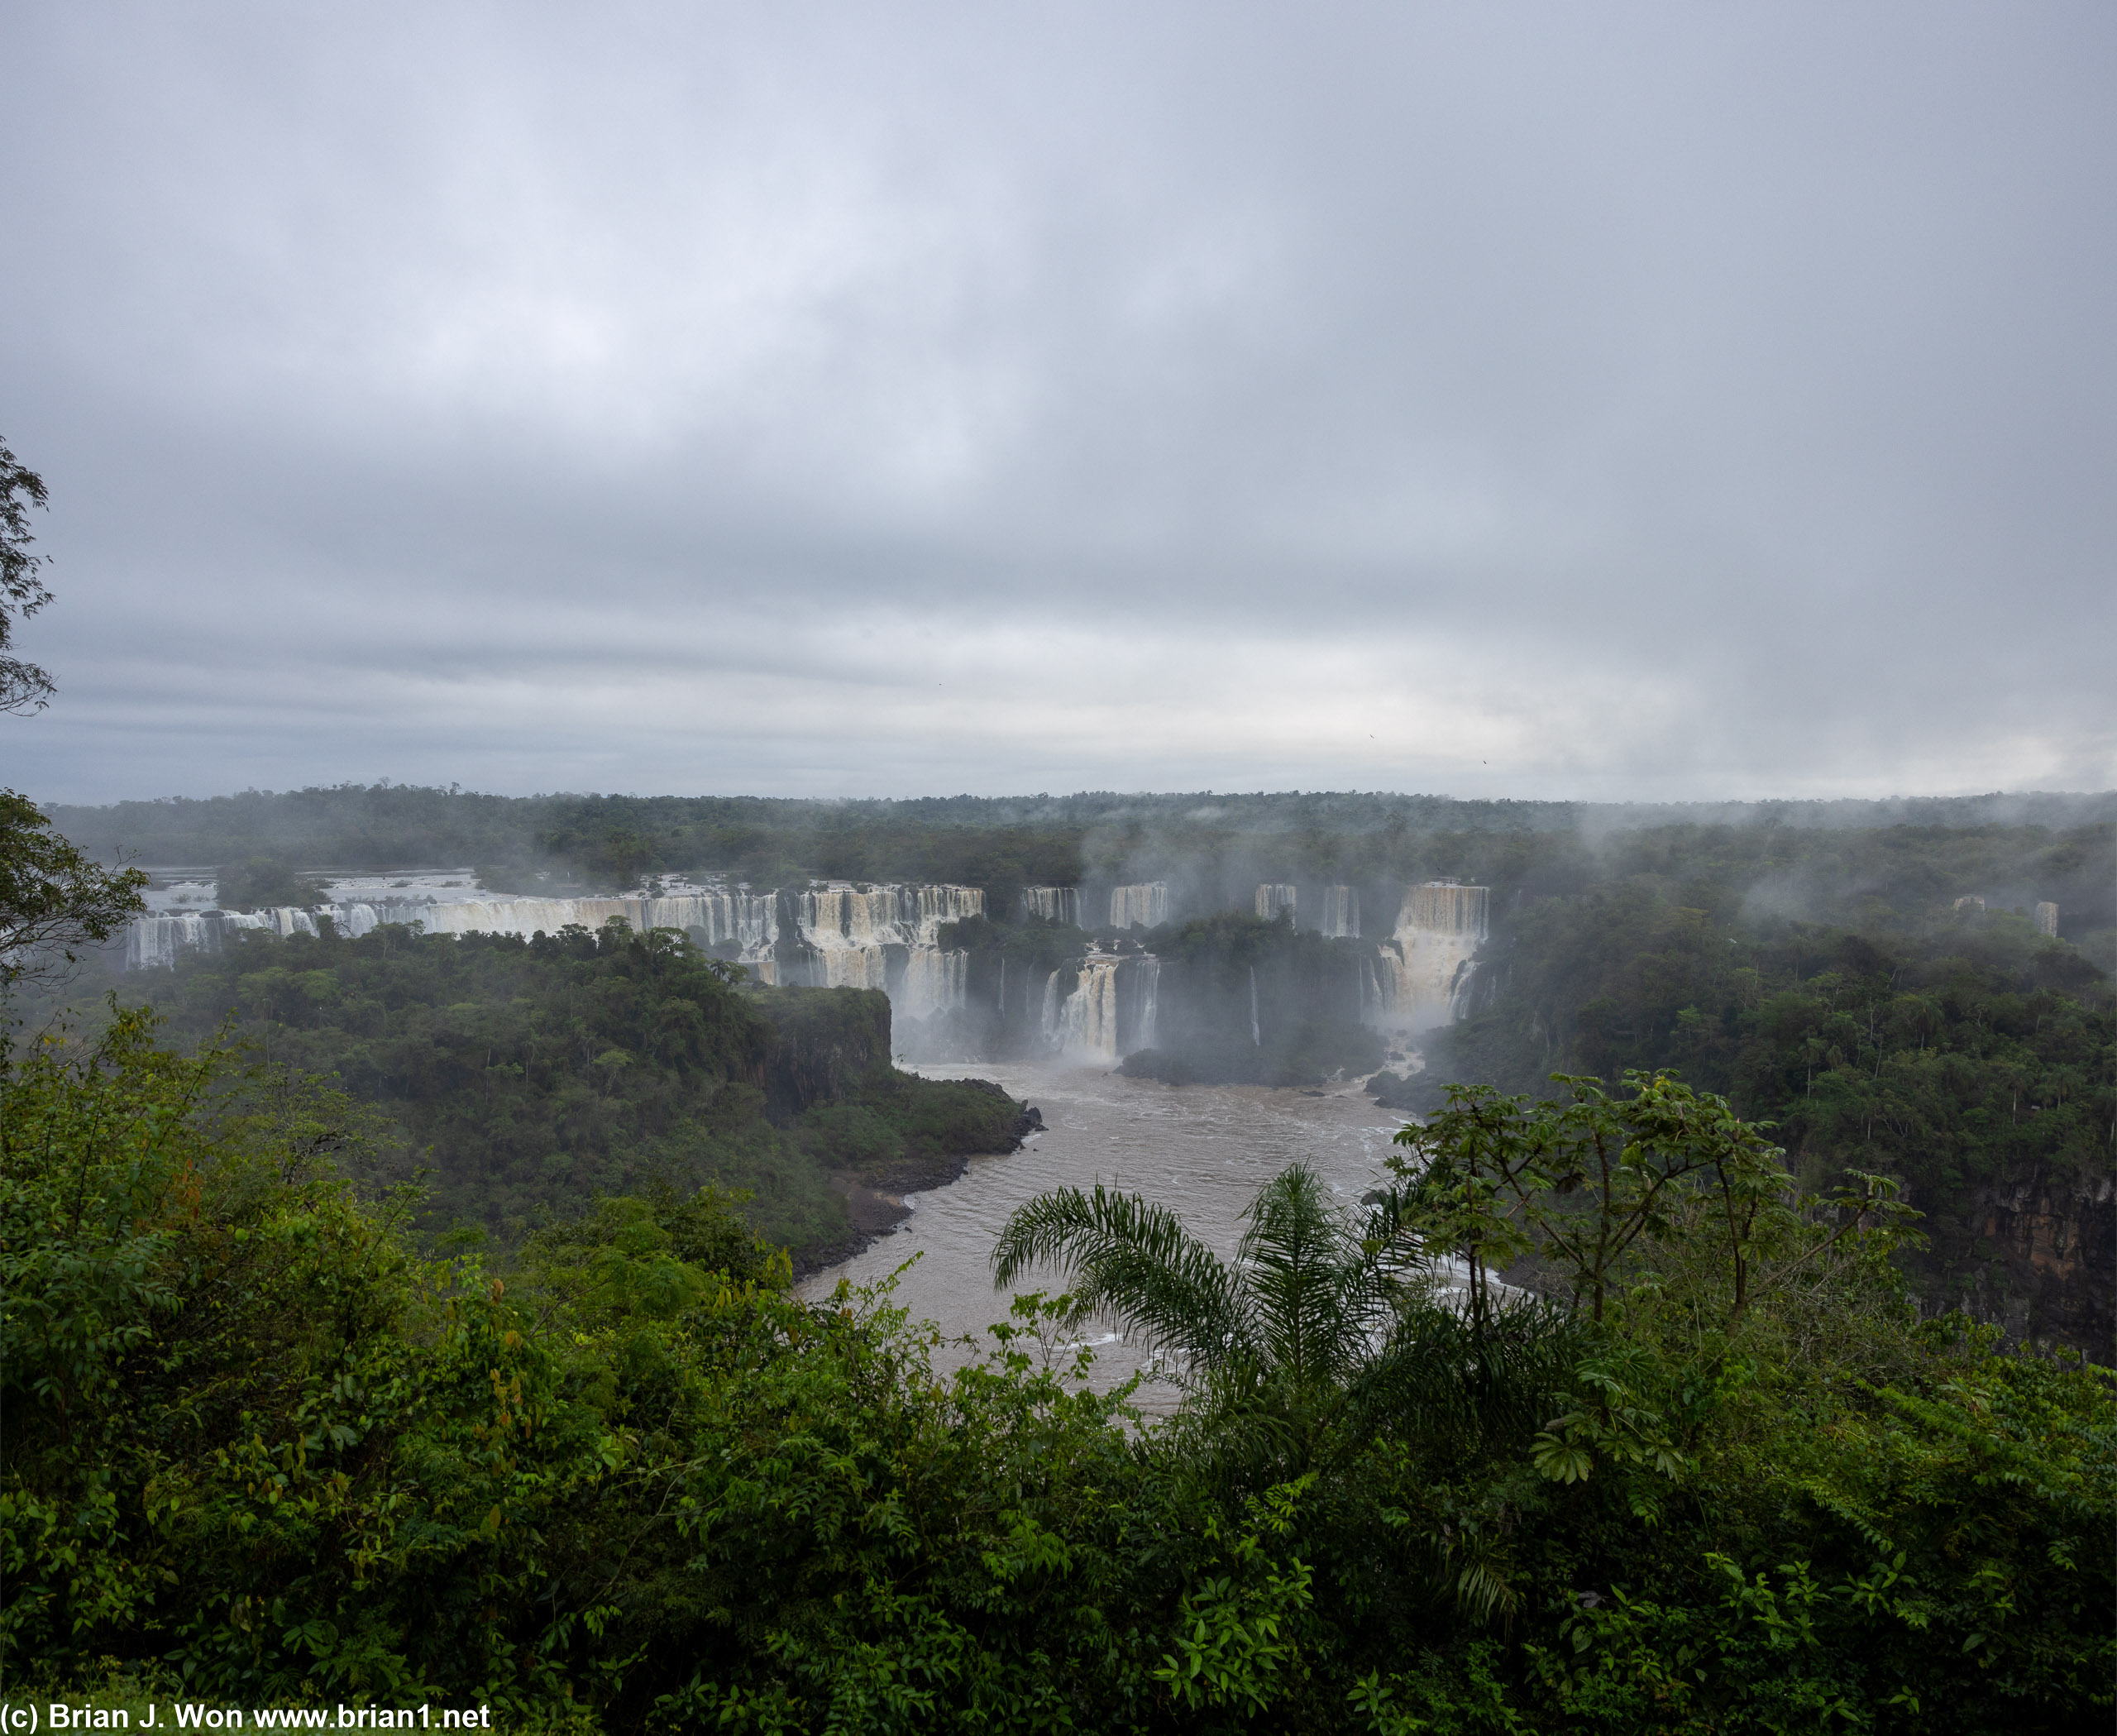 Starting off with a morning walk of Iguazu Falls, limited to hotel guests.